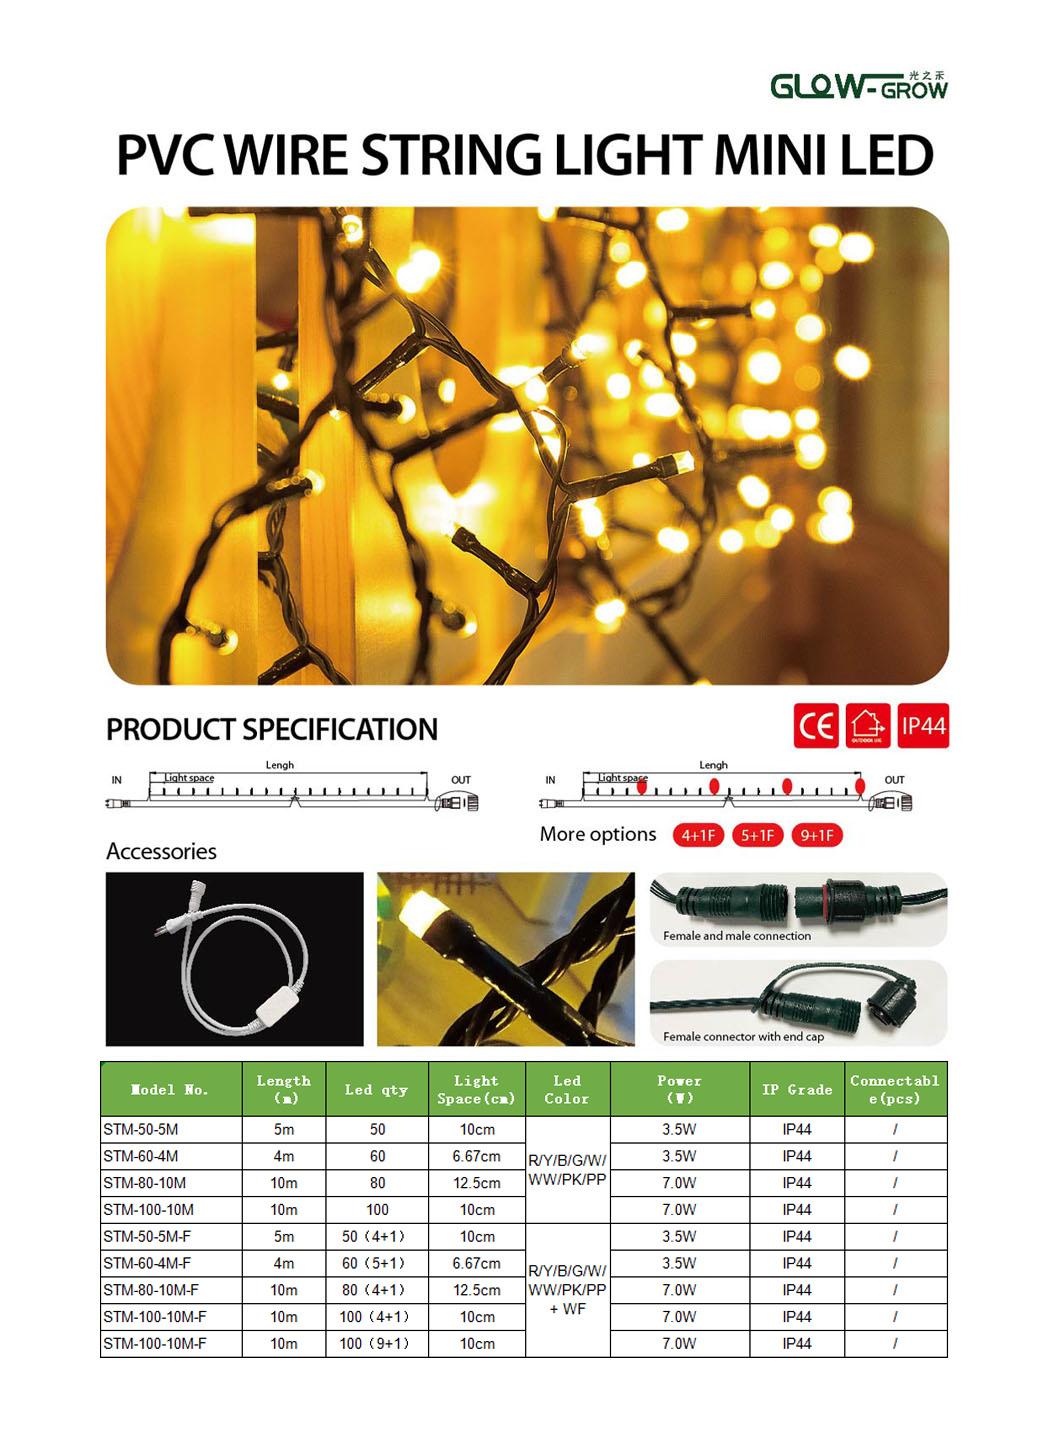 Waterproof PVC Cable Christmas Mini String Light Fairy Light Green Twinkle LED Light for Home Party Holiday Garden Patio Decoration